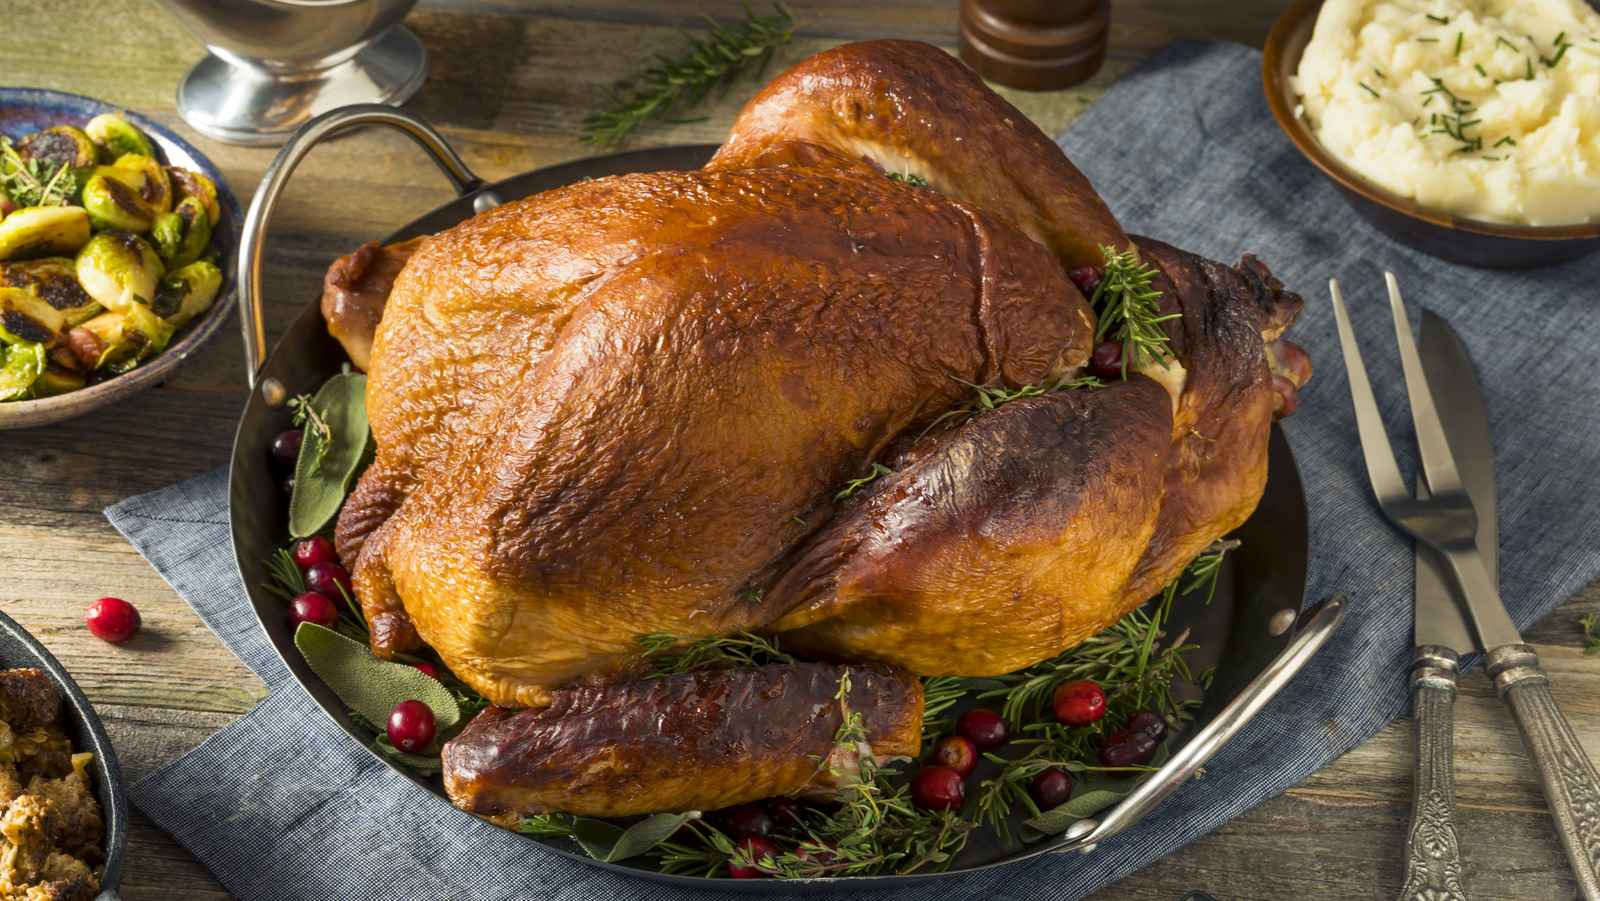 Why You Should Disregard Your Turkey's Pop-Up Thermometer